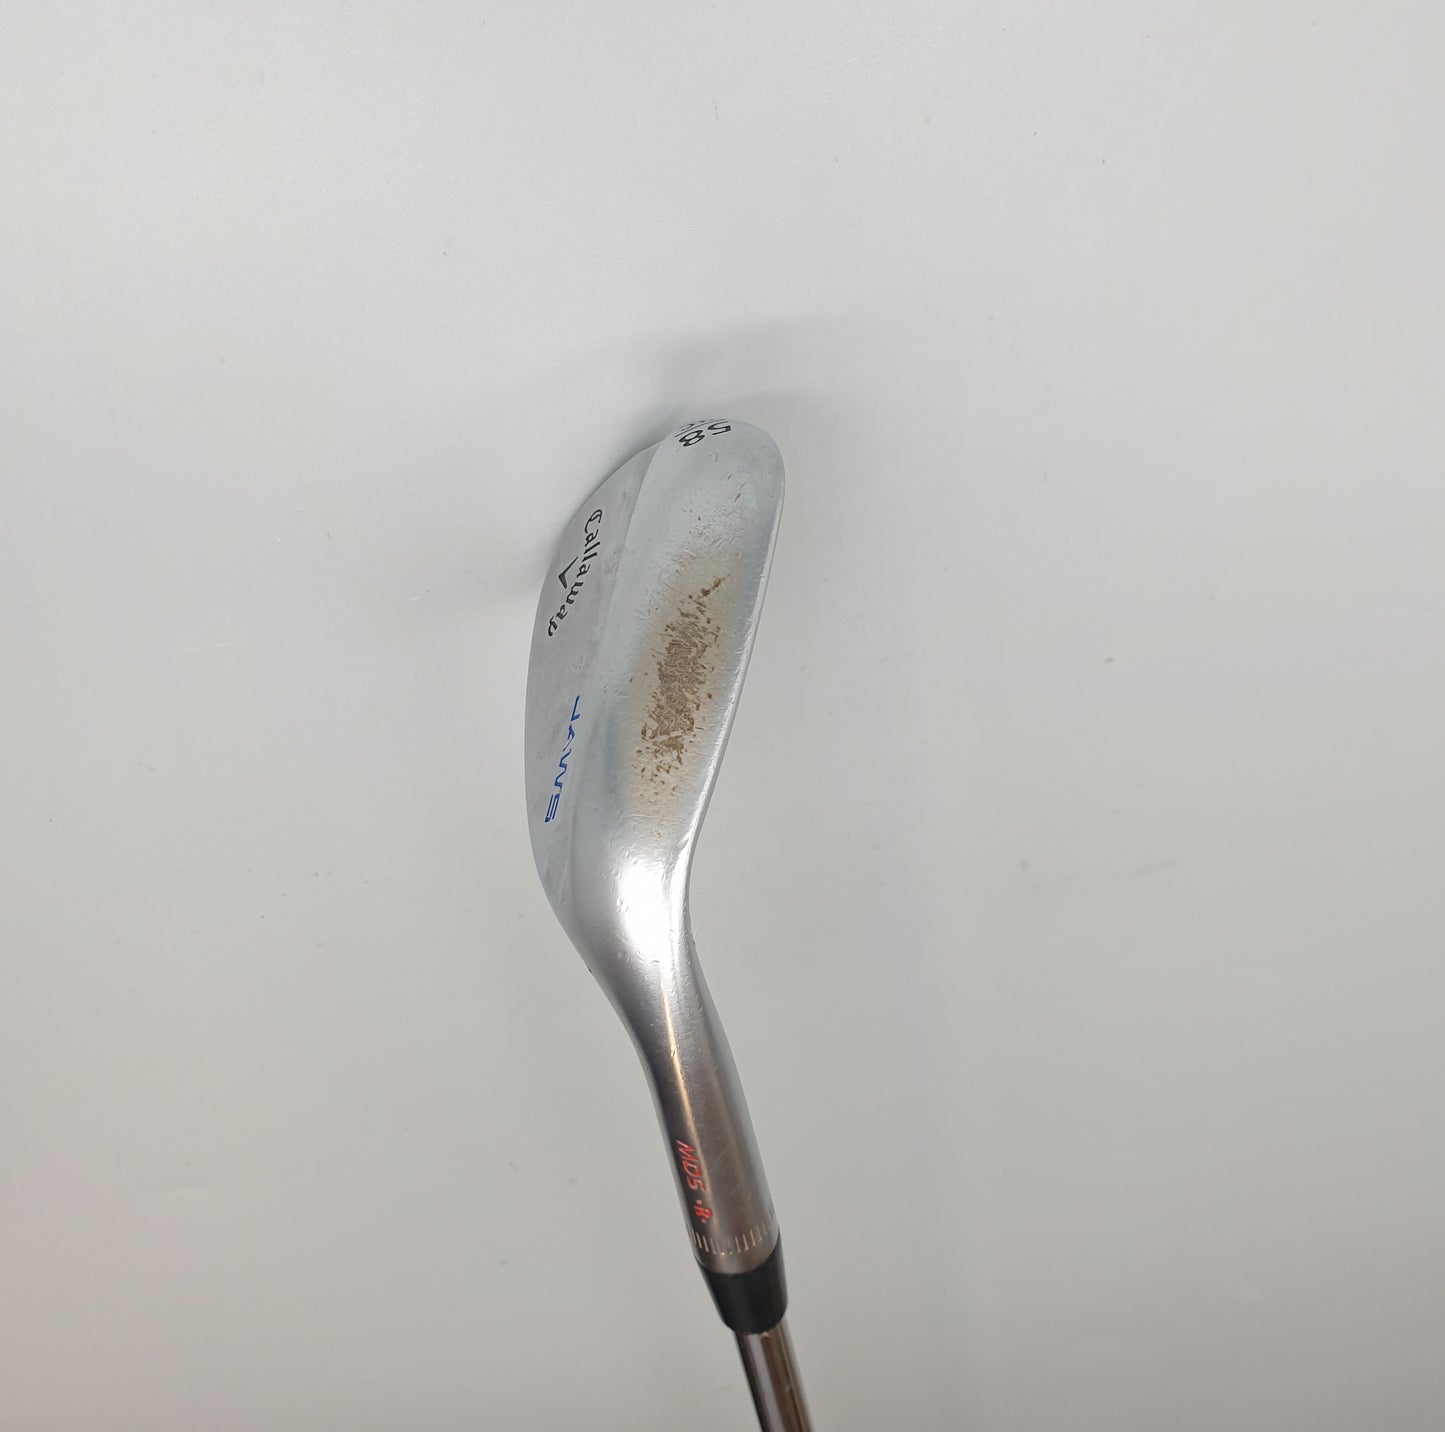 Callaway Jaws MD5 58.8C Elevate Stiff Right Hand - Used